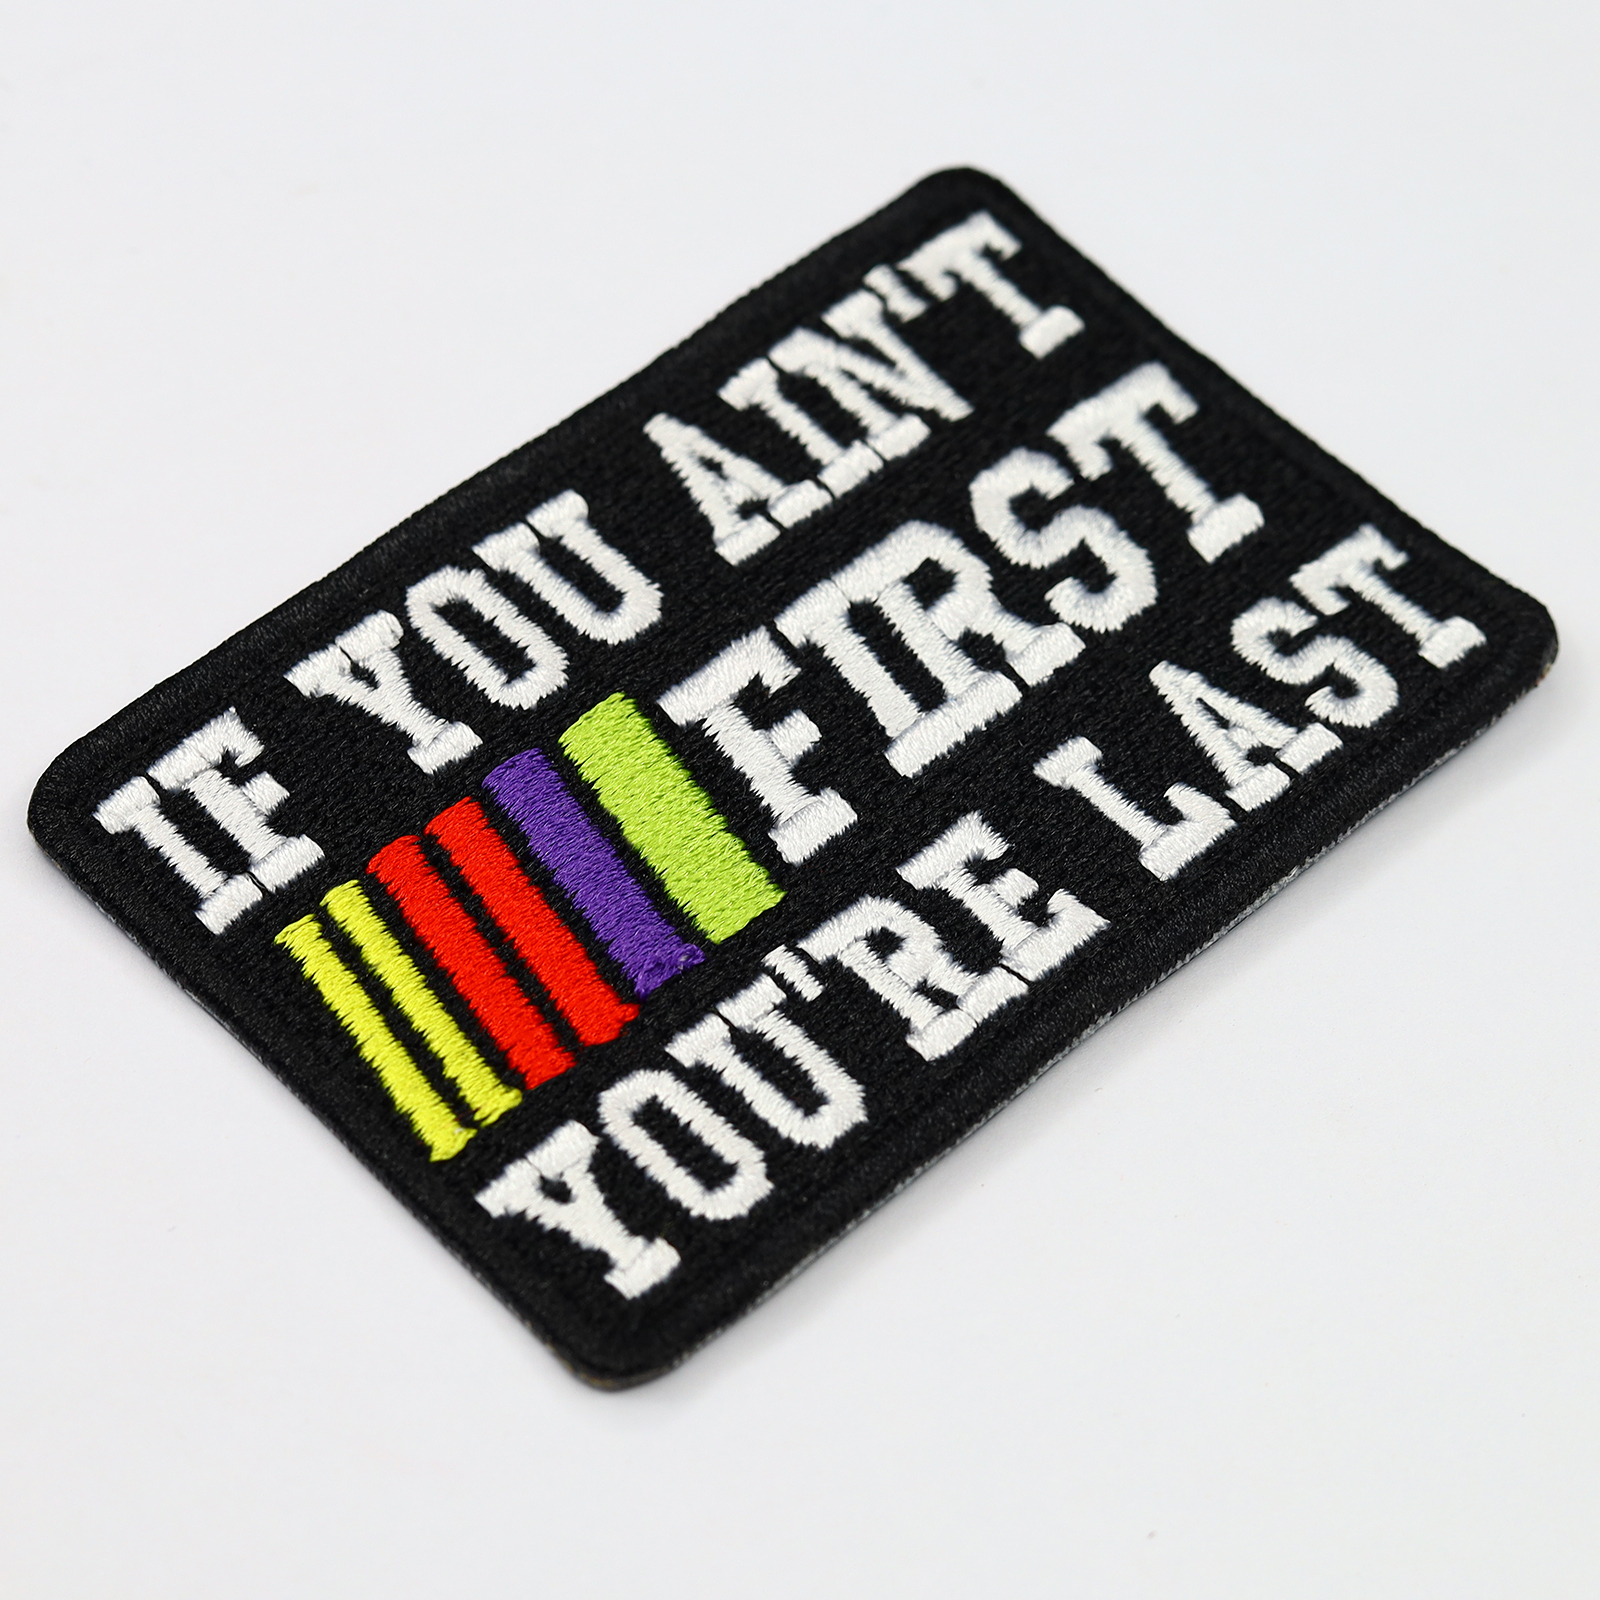 If you ain't first you're last - Patch